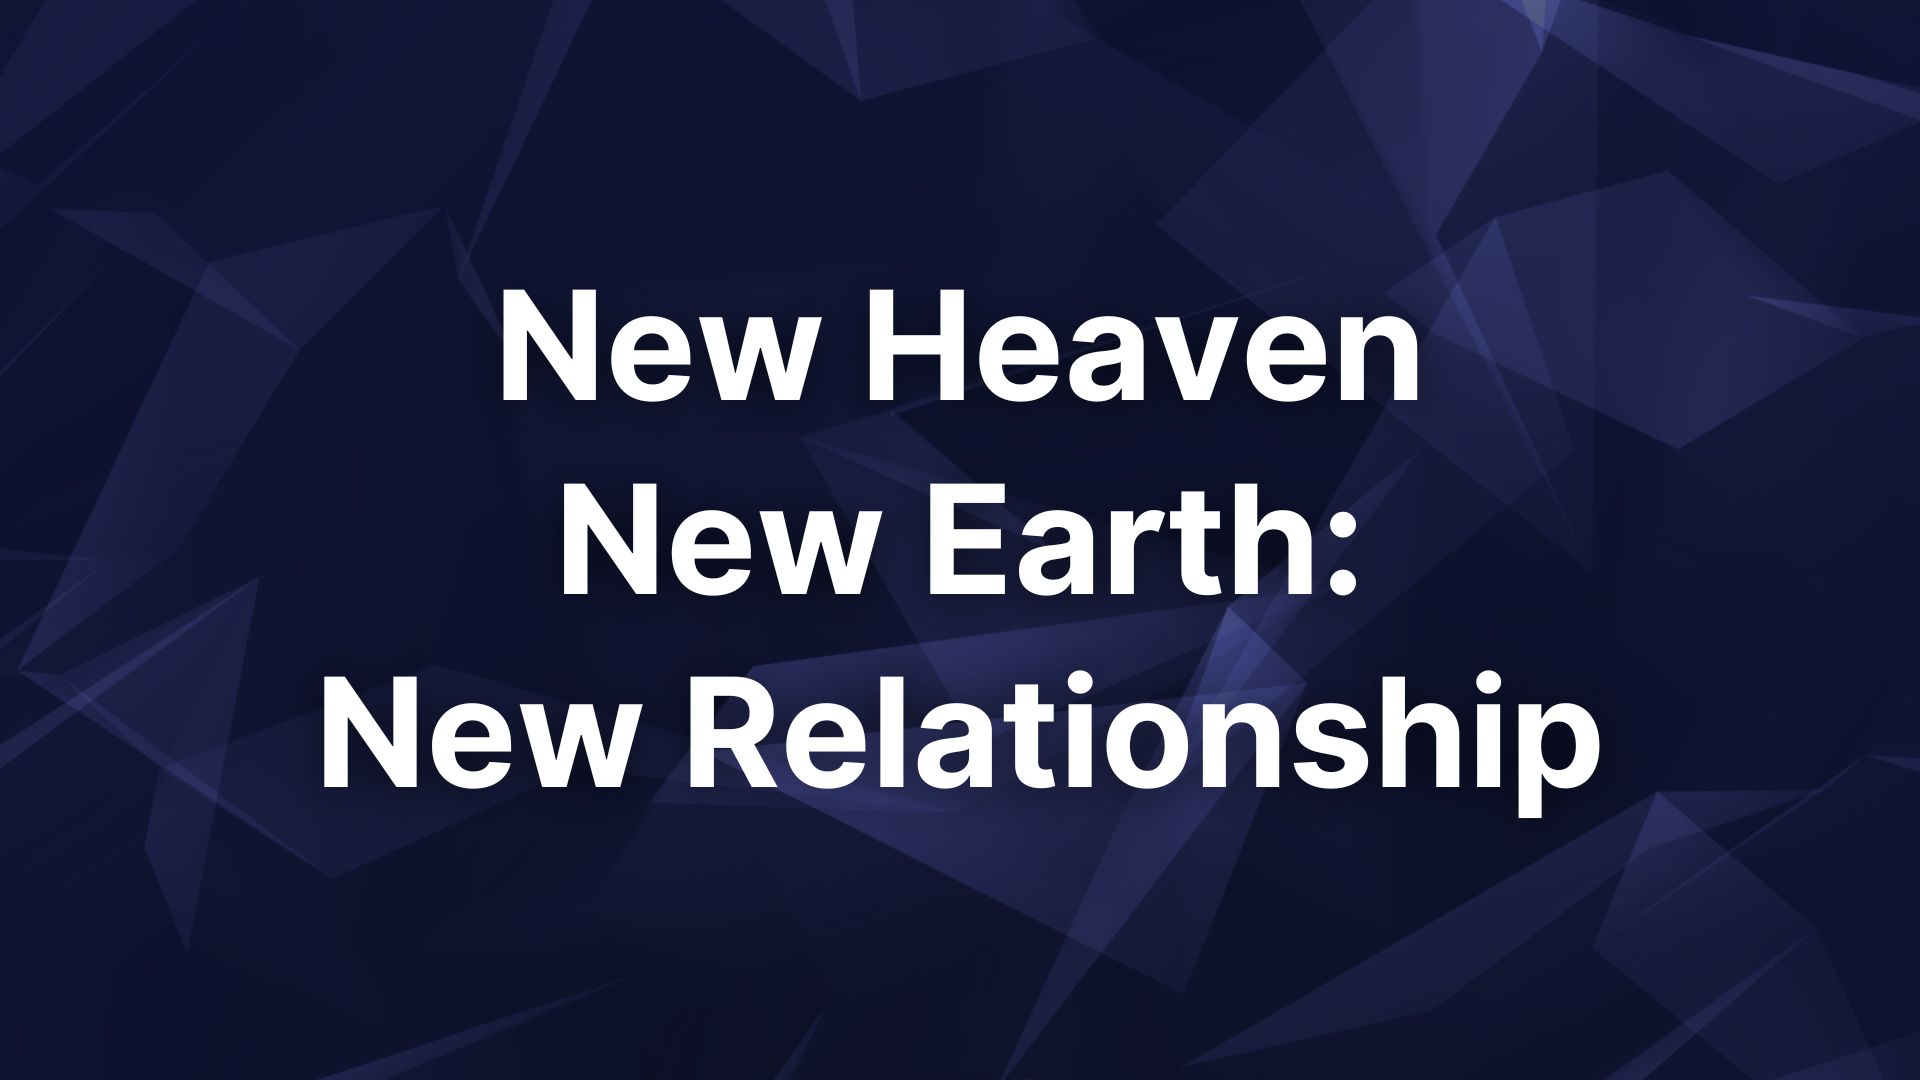 New Heaven New Earth: New Relationship